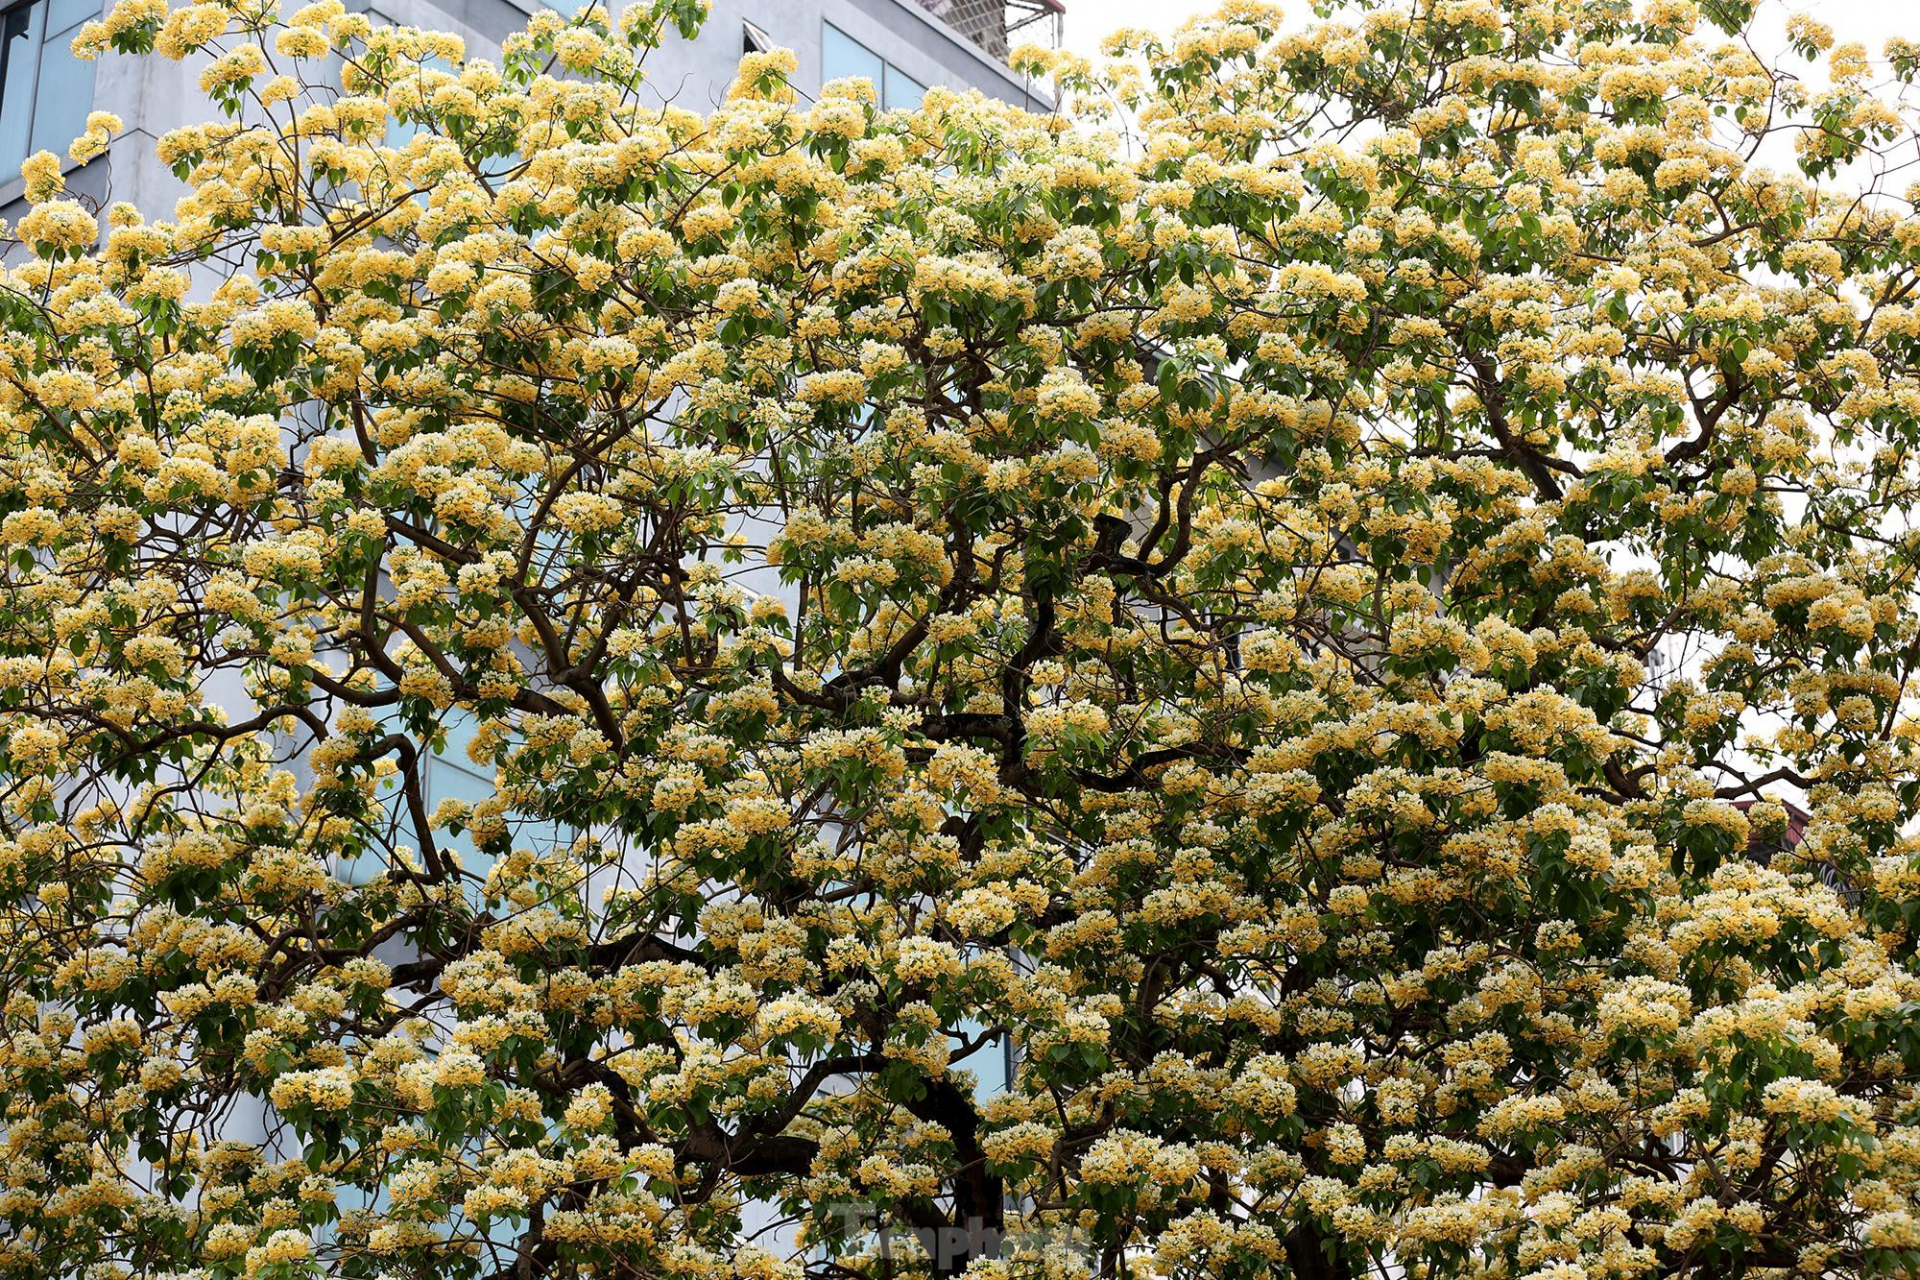 In Photos: 300-year-old Hoa Bun tree gorgeously blooms in the heart of Hanoi